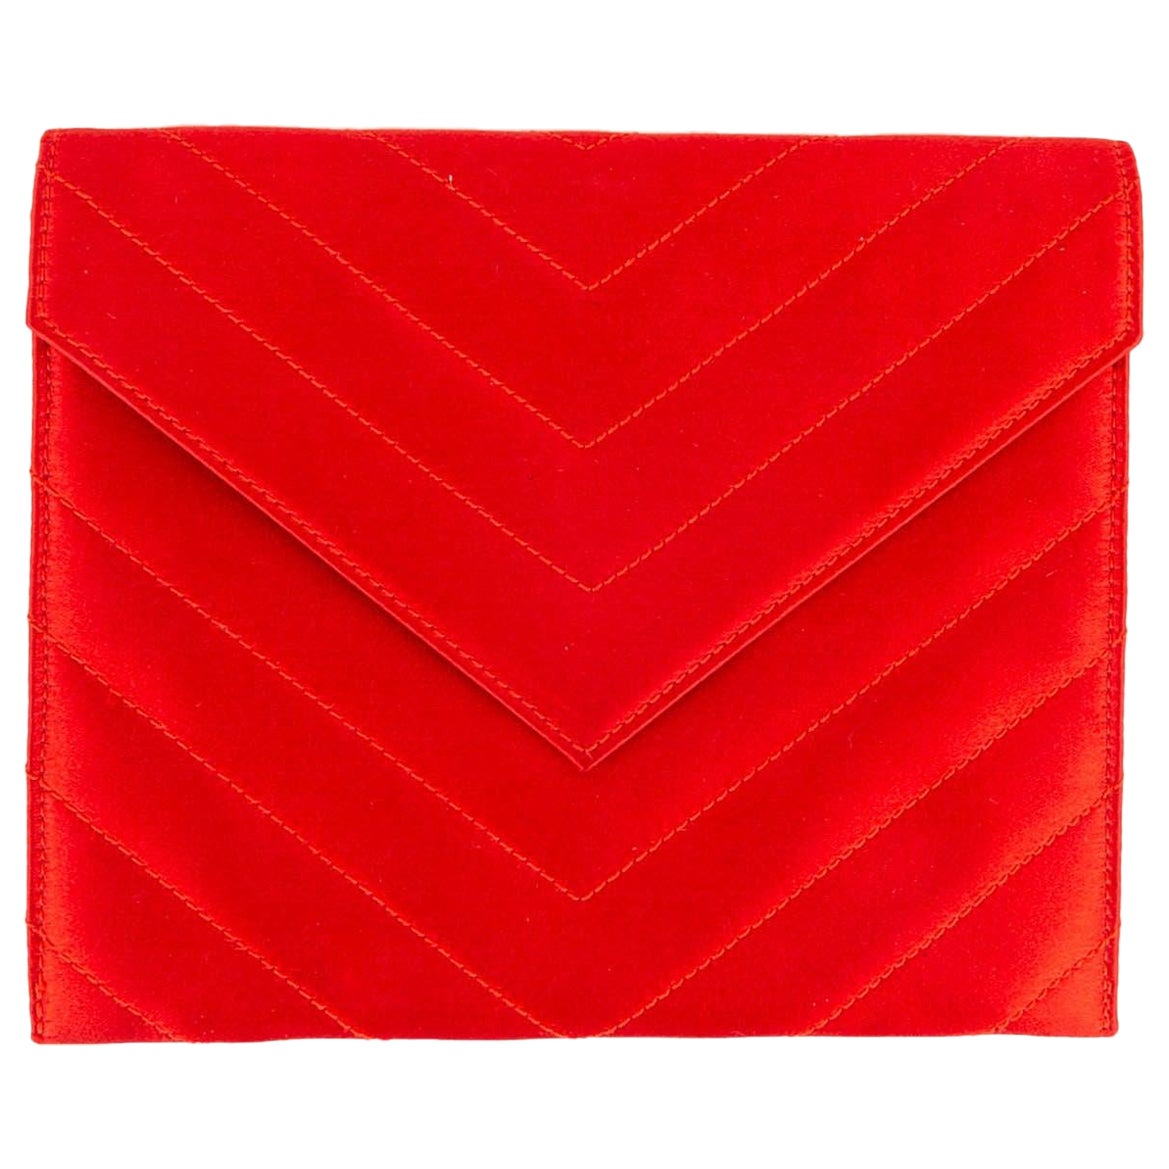 Yves Saint Laurent Quilted Satin Clutch For Sale